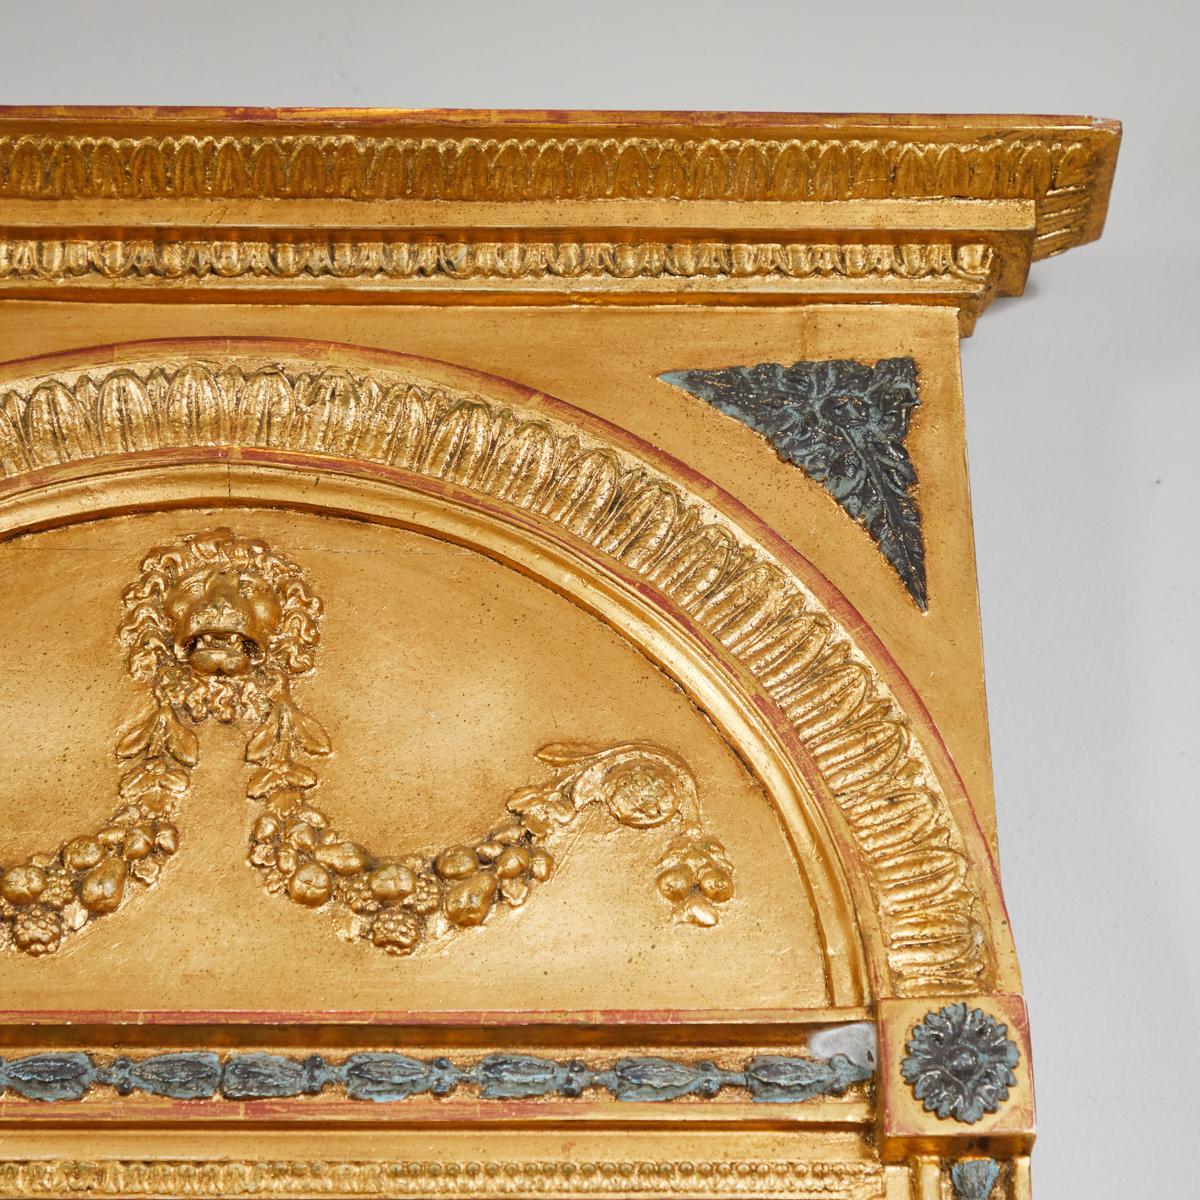 A Gustavian rectangular gilt mirror with beveled cornice top, carved arch frieze and anthemion accents. The neoclassical carving of a lion's head holding swags of fruit adds a regal touch. Painted blue architectural accents lend contrast and enhance